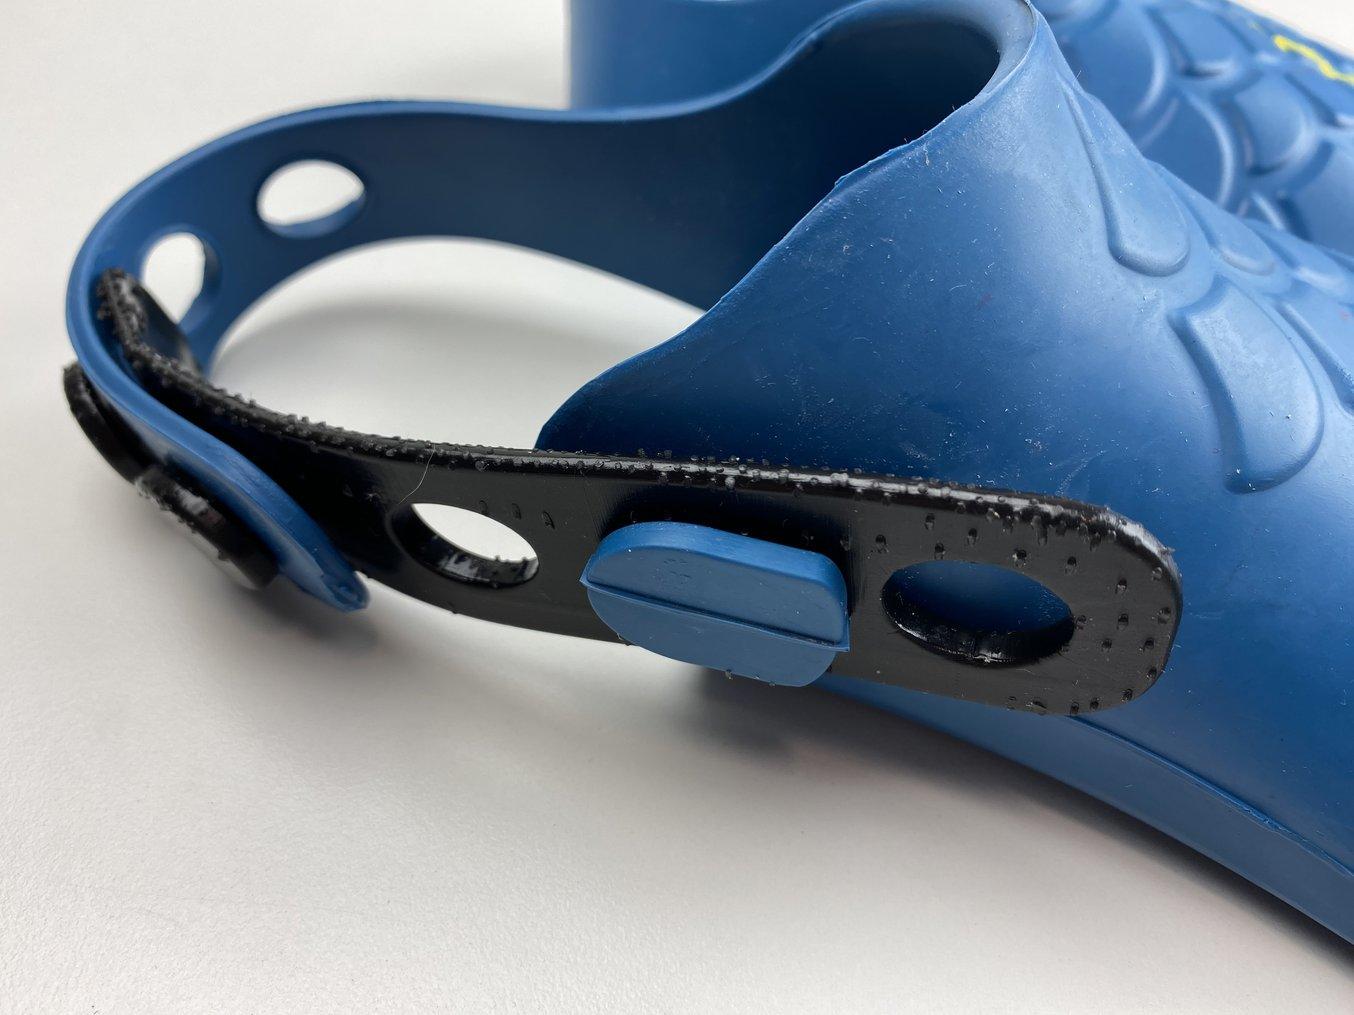 The product development group developed a strap extension to accommodate all sizes.